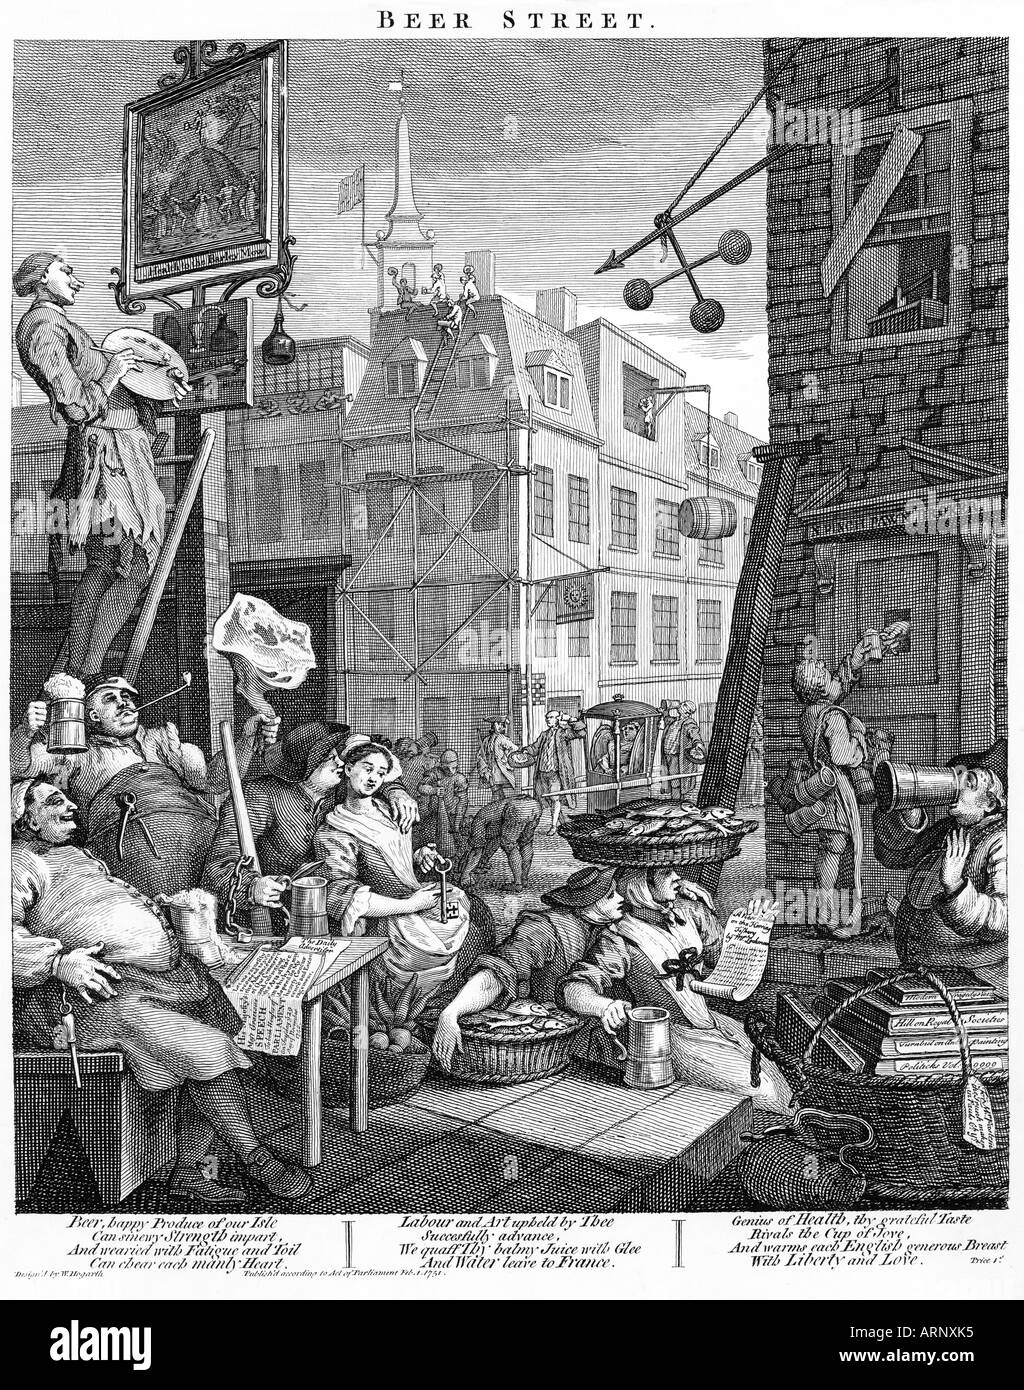 Beer Street William Hogarth 3rd state of the famous 1751 engraving produced to extol the healthy consumption of beer Stock Photo